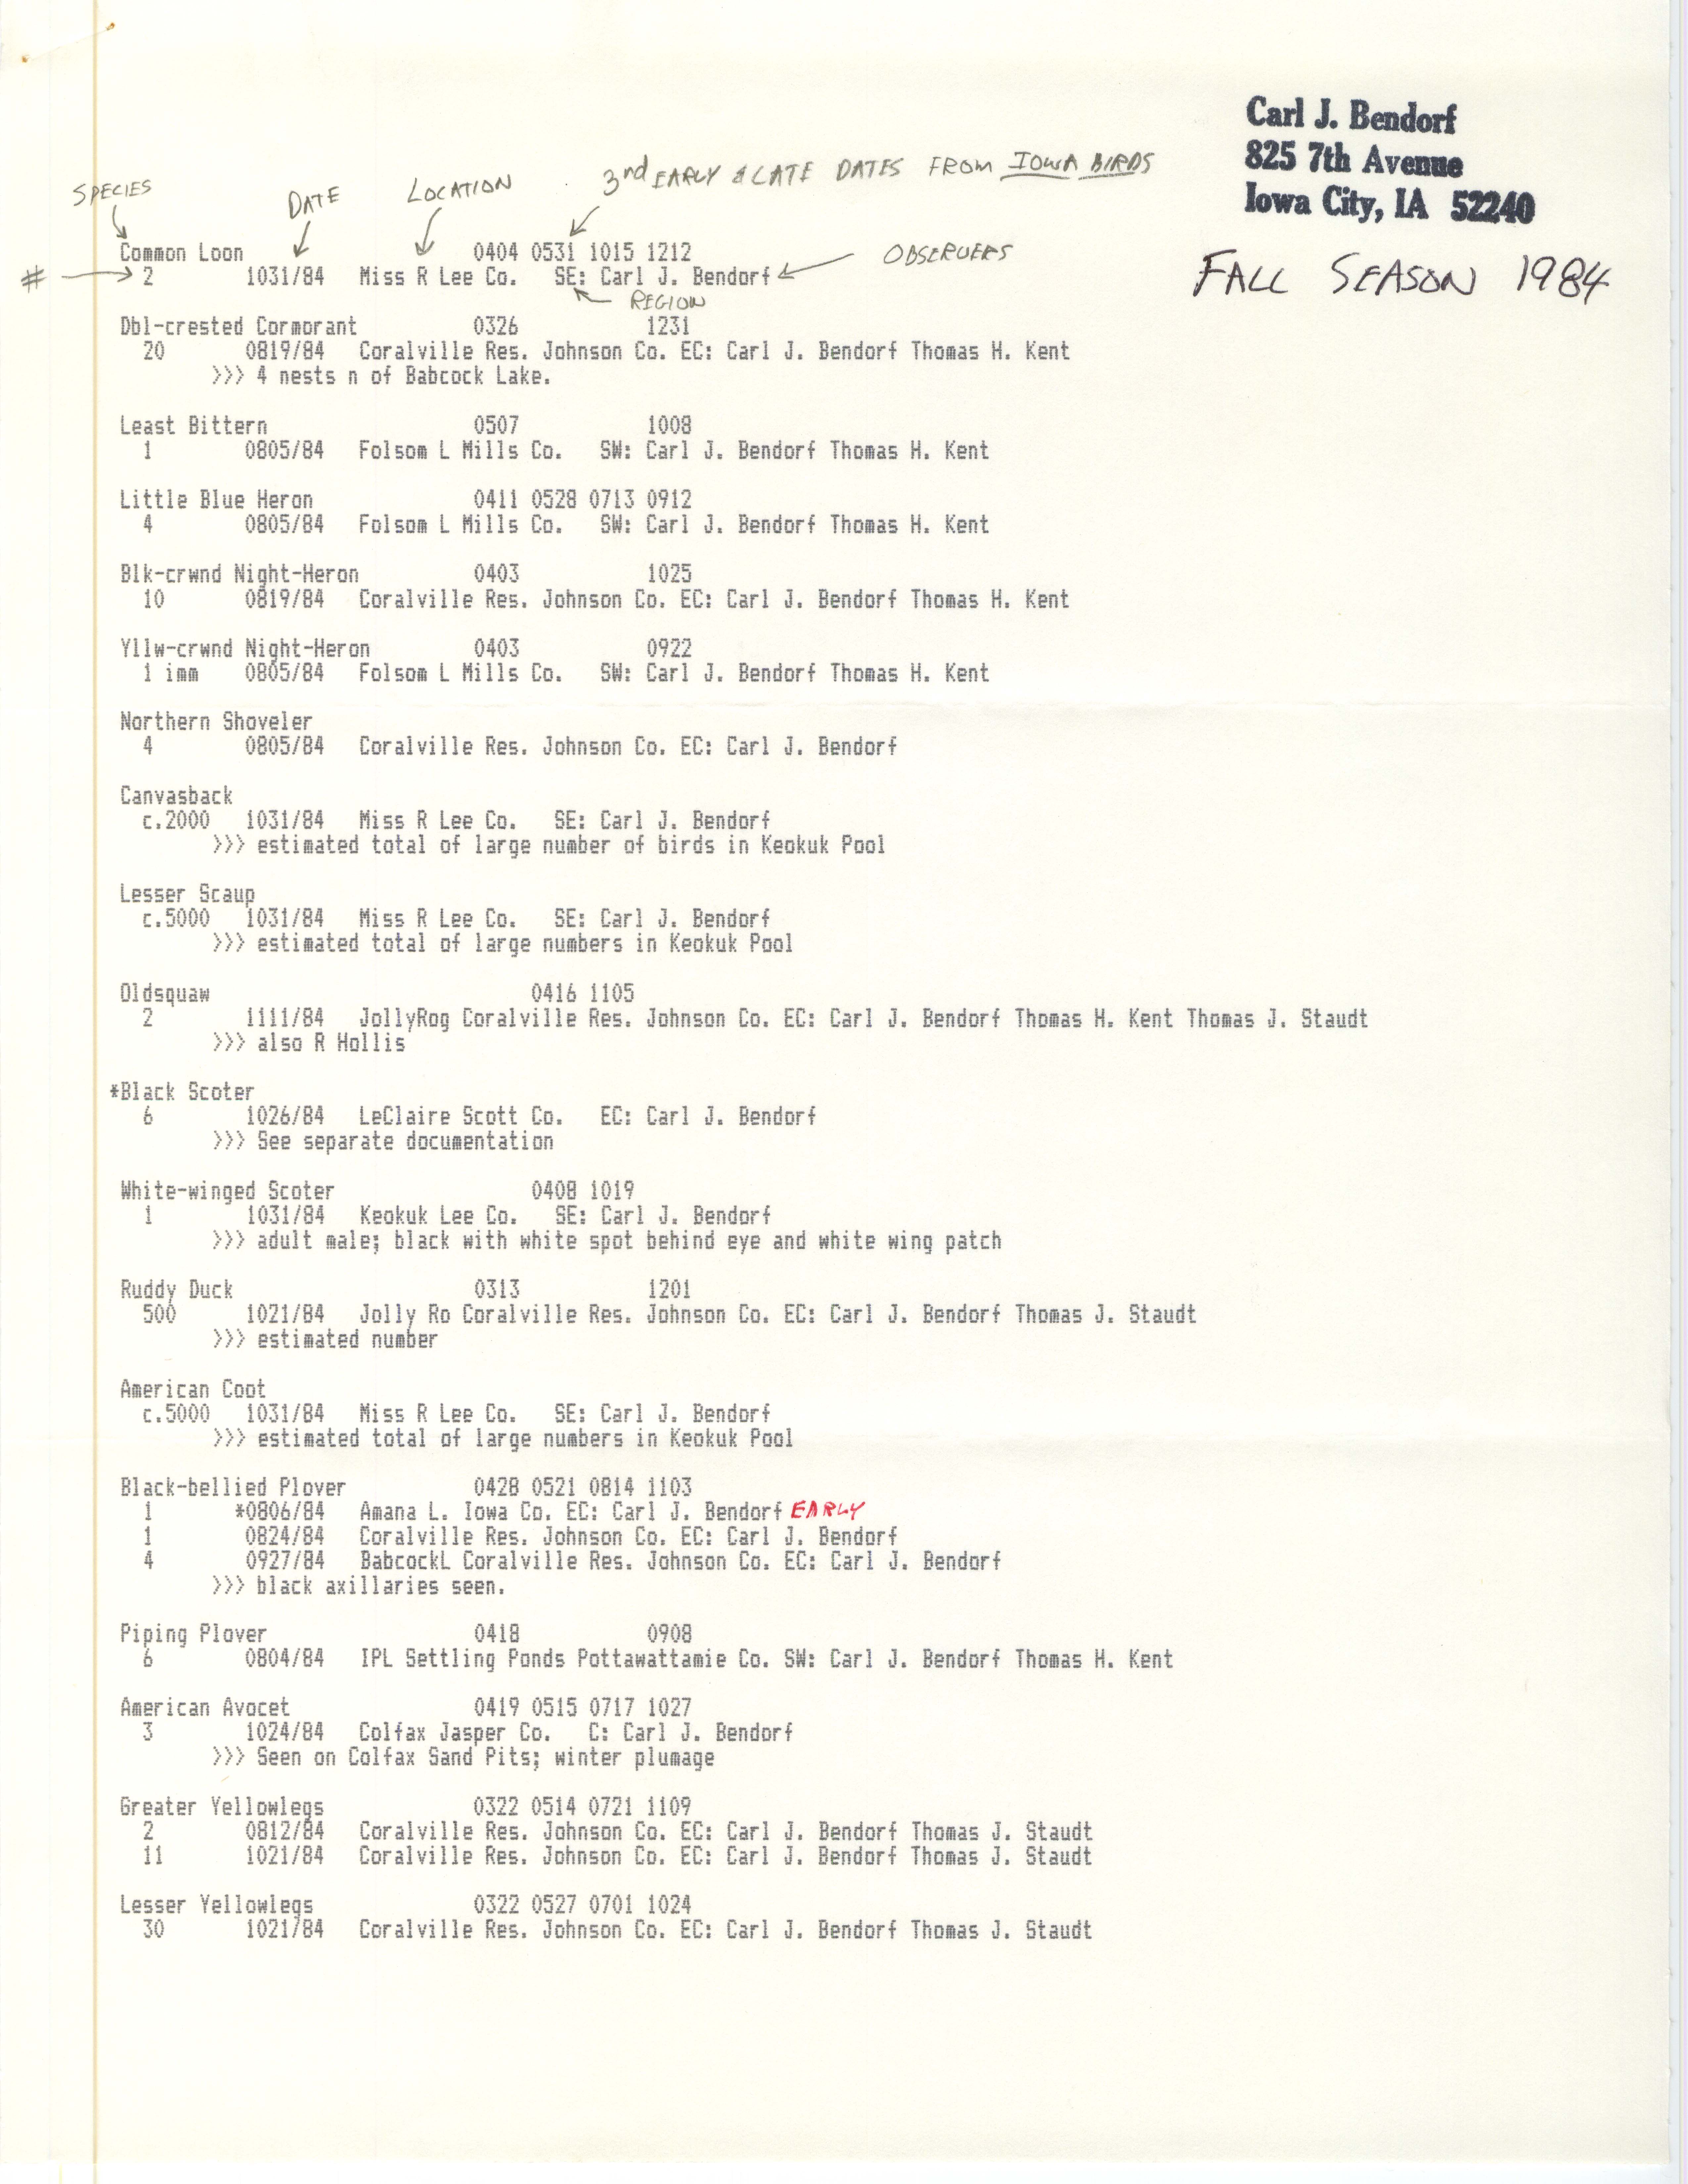 Field notes contributed by Carl J. Bendorf, fall 1984